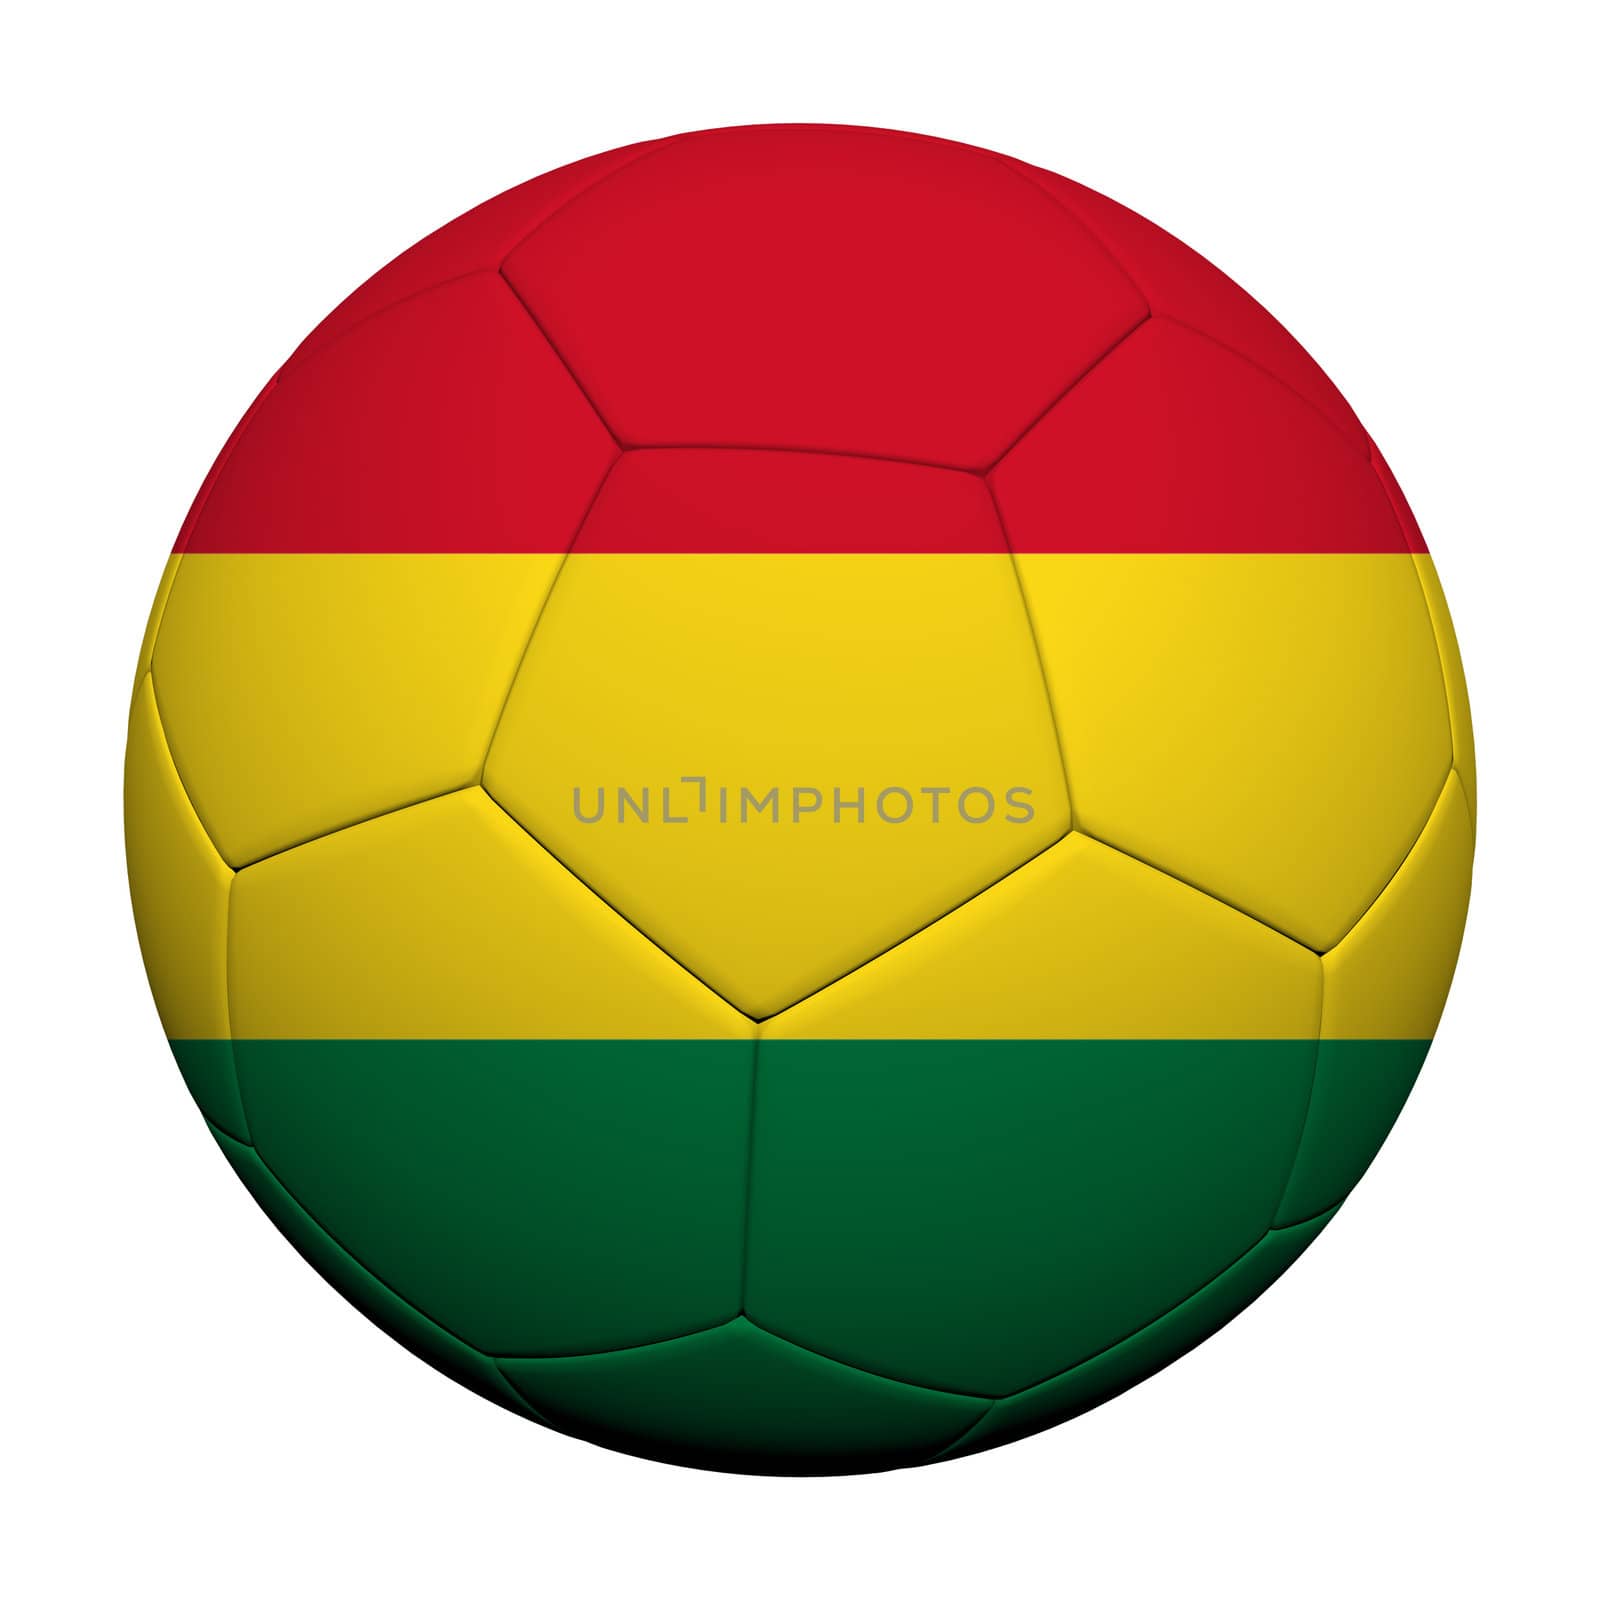 Bolivia  Flag Pattern 3d rendering of a soccer ball  by jakgree